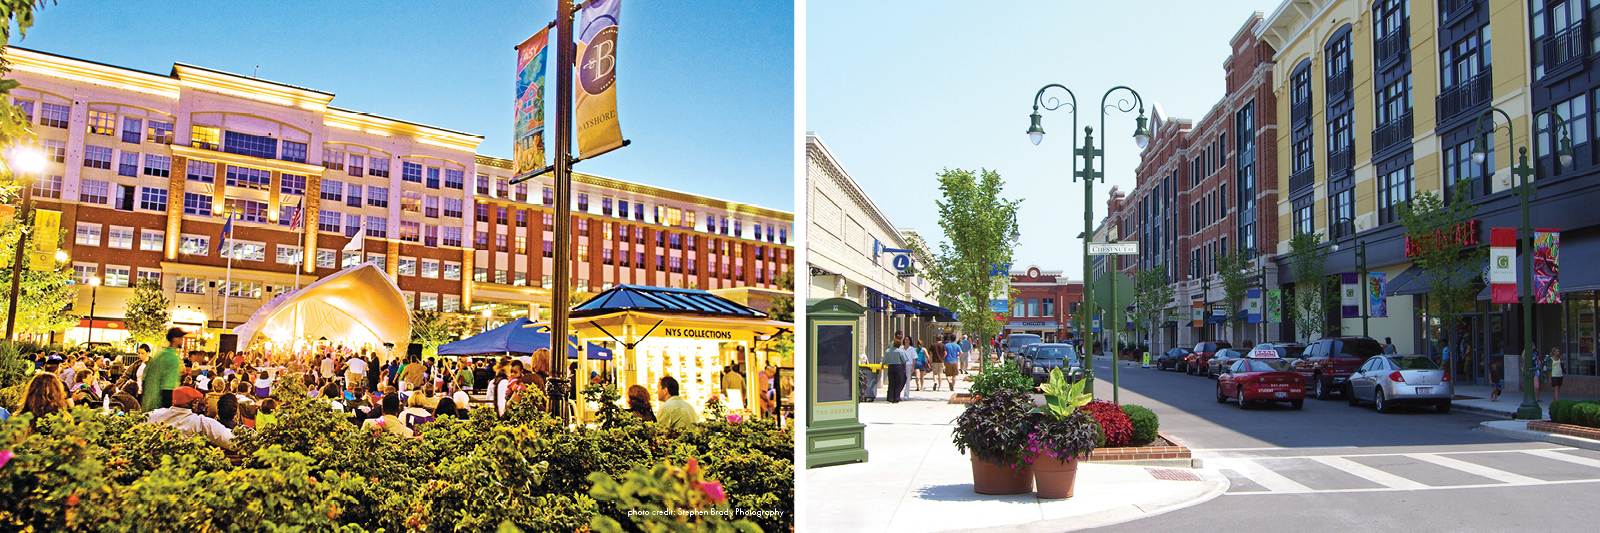 integrating residential to create mixed-use communities